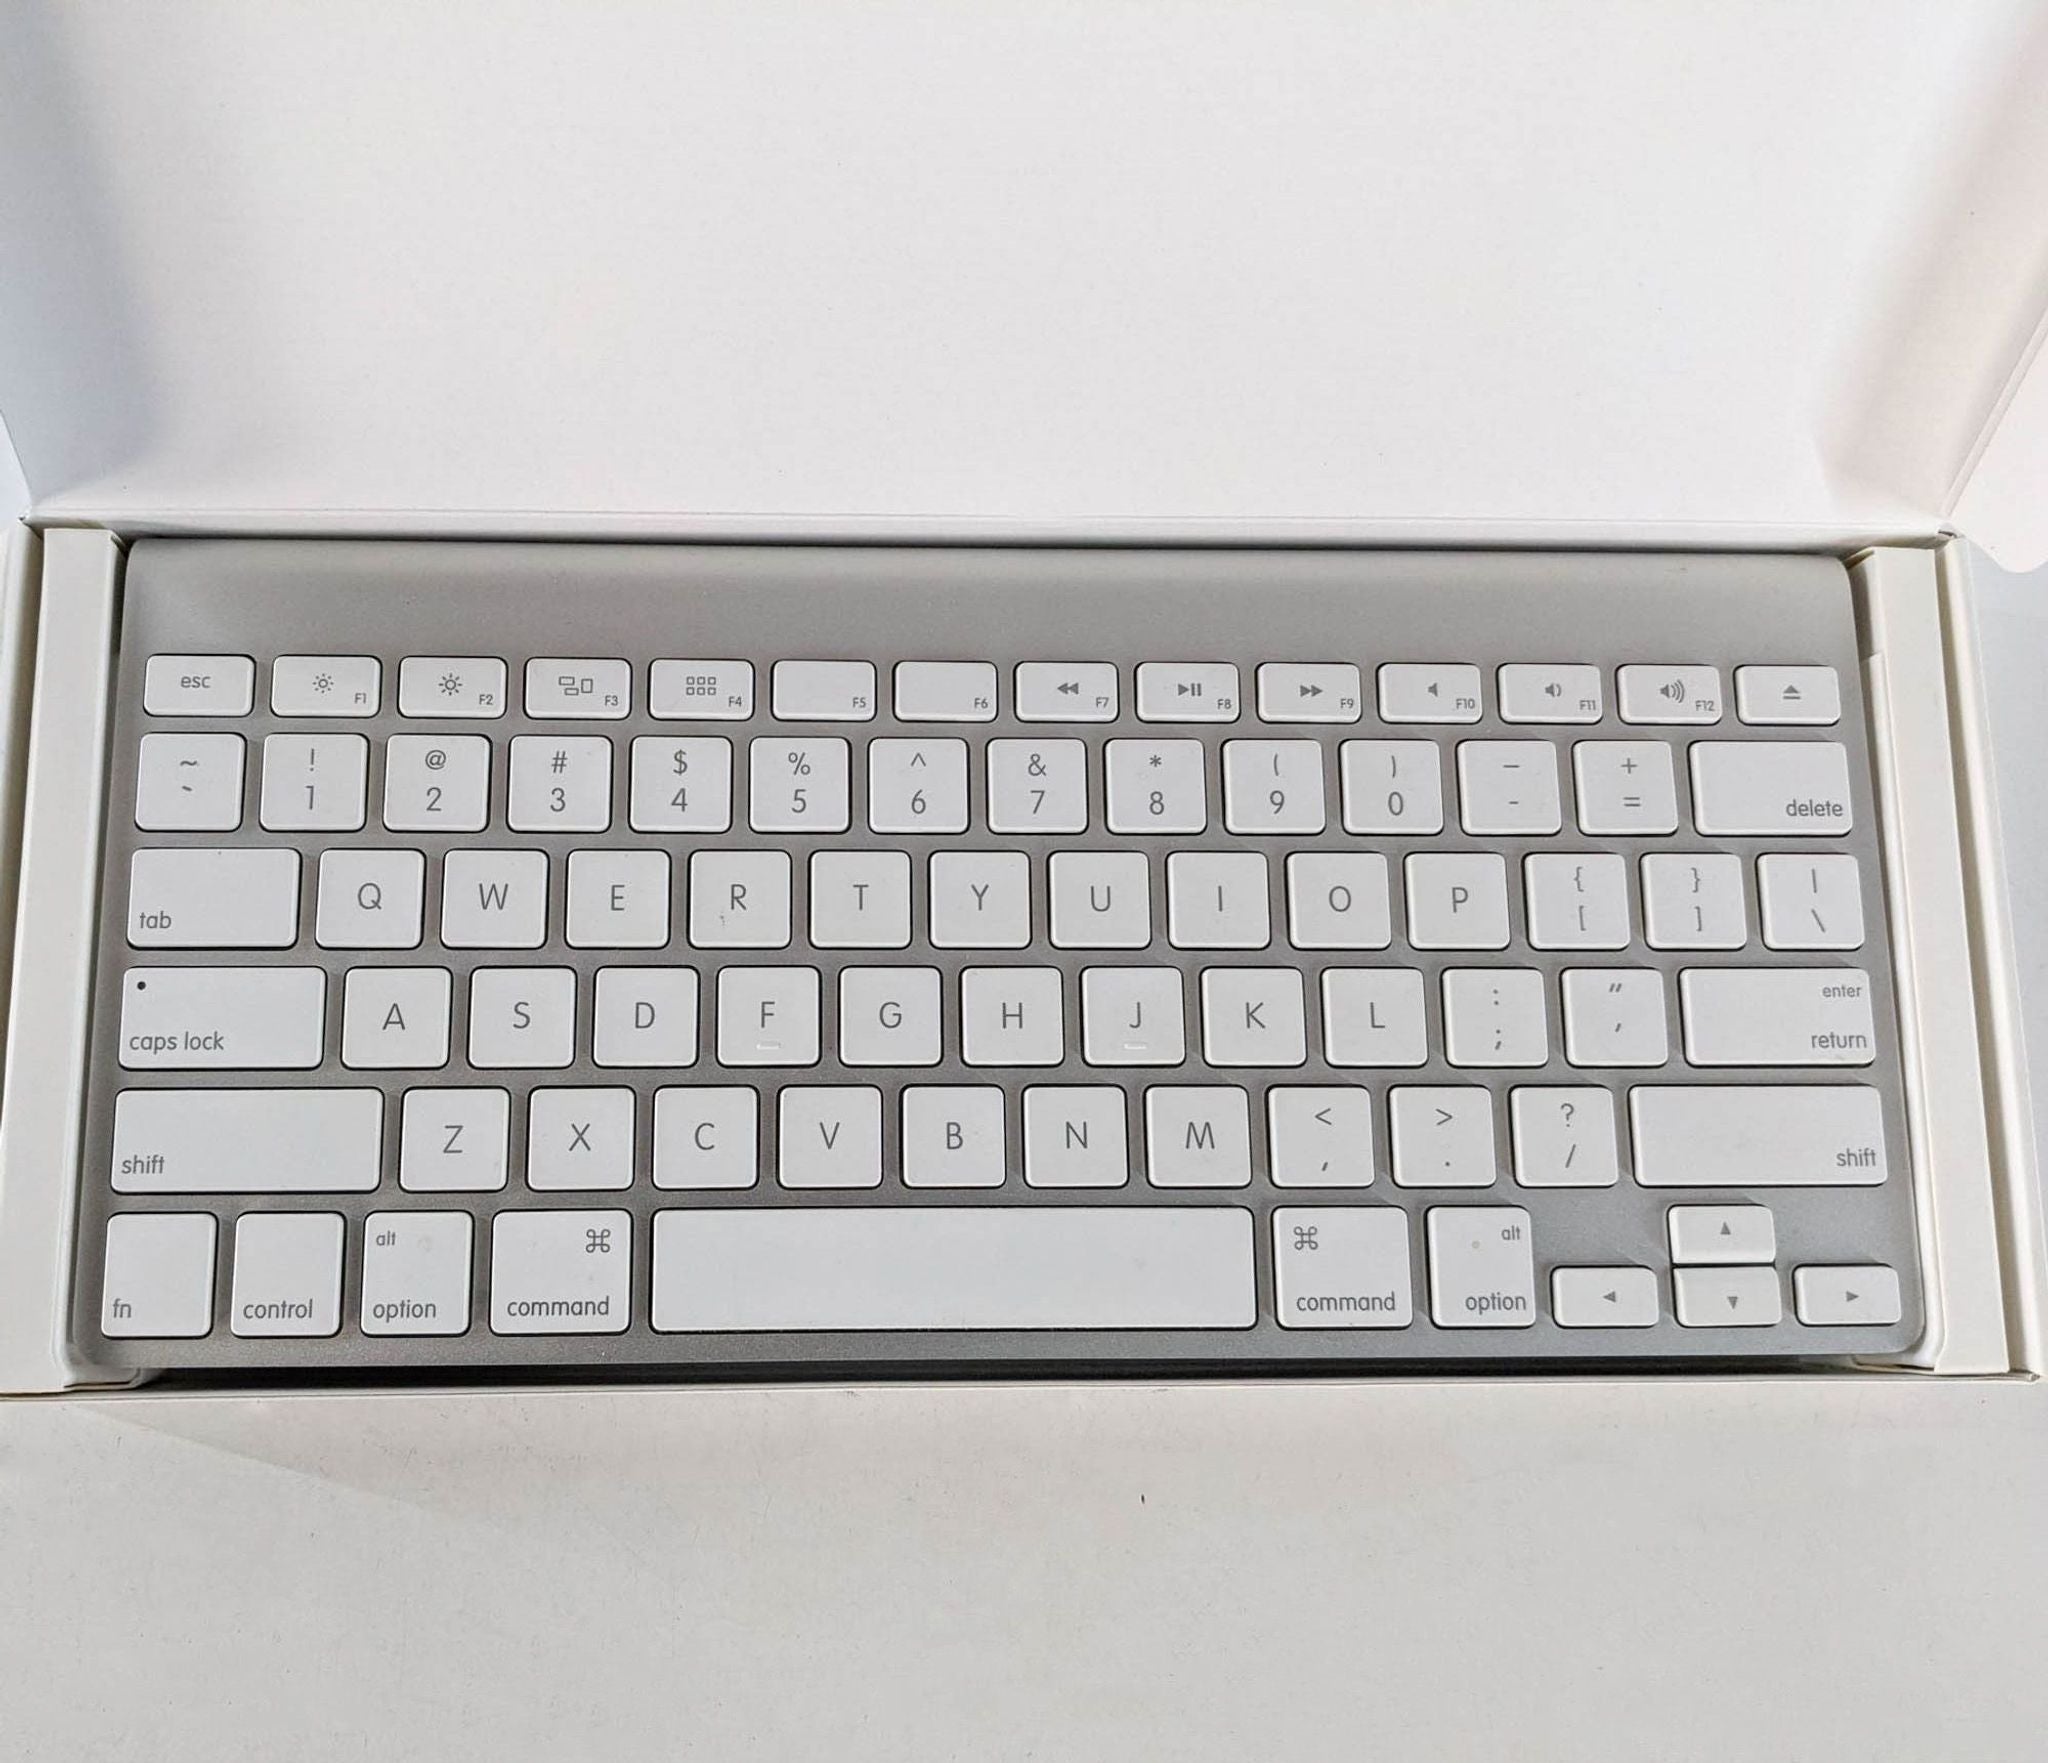 Alt text 2: Apple wireless keyboard in open box, viewed from above, highlighting the sleek layout and white keys against a white background.